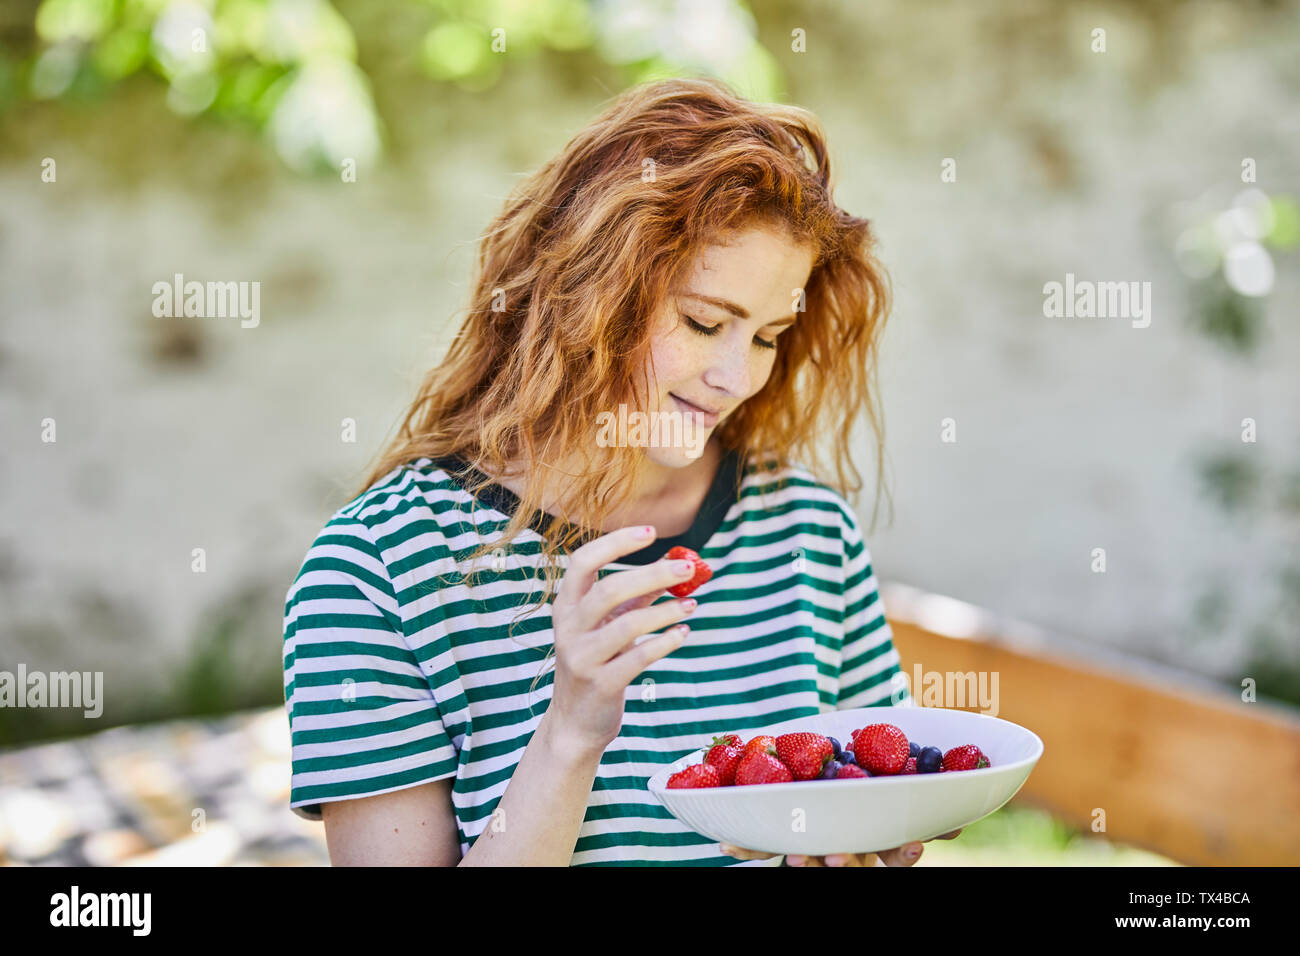 Portrait of smiling redheaded young woman with bowl of berries in the garden Stock Photo